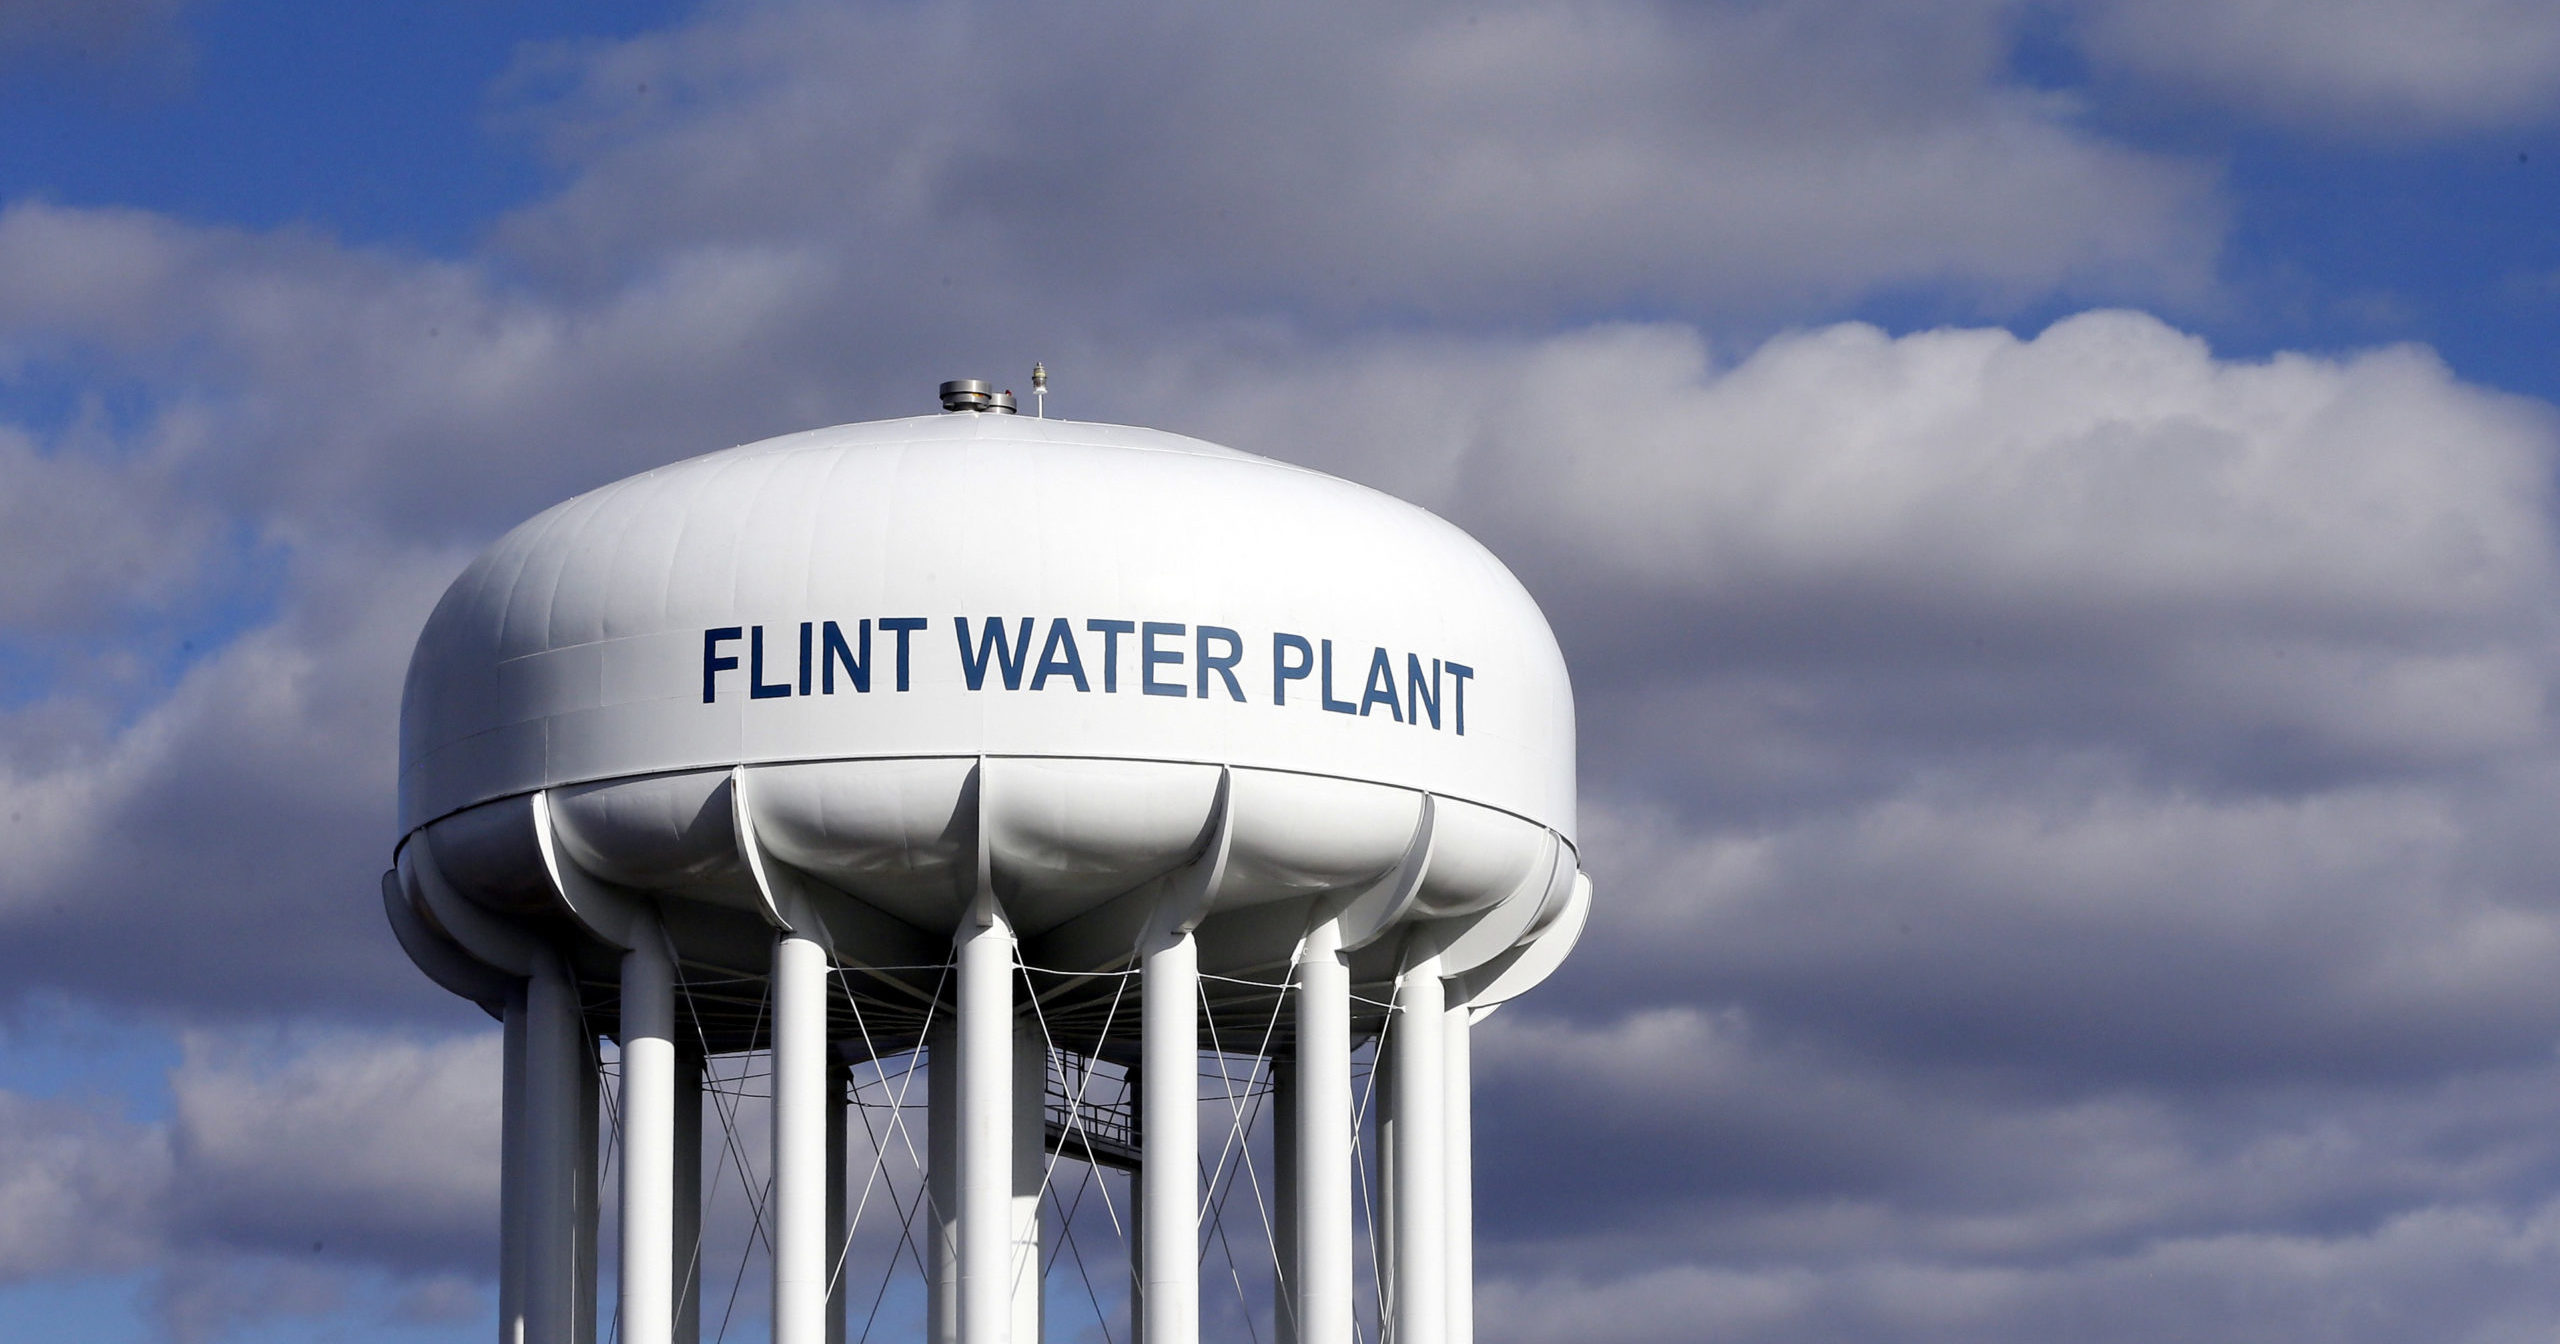 In this March 21, 2016, file photo, the Flint Water Plant water tower is seen in Flint, Michigan. Multiple news outlets reported on Aug. 19, 2020, that the state of Michigan has reached a $600 million agreement to compensate Flint residents whose health was damaged by lead-tainted drinking water.